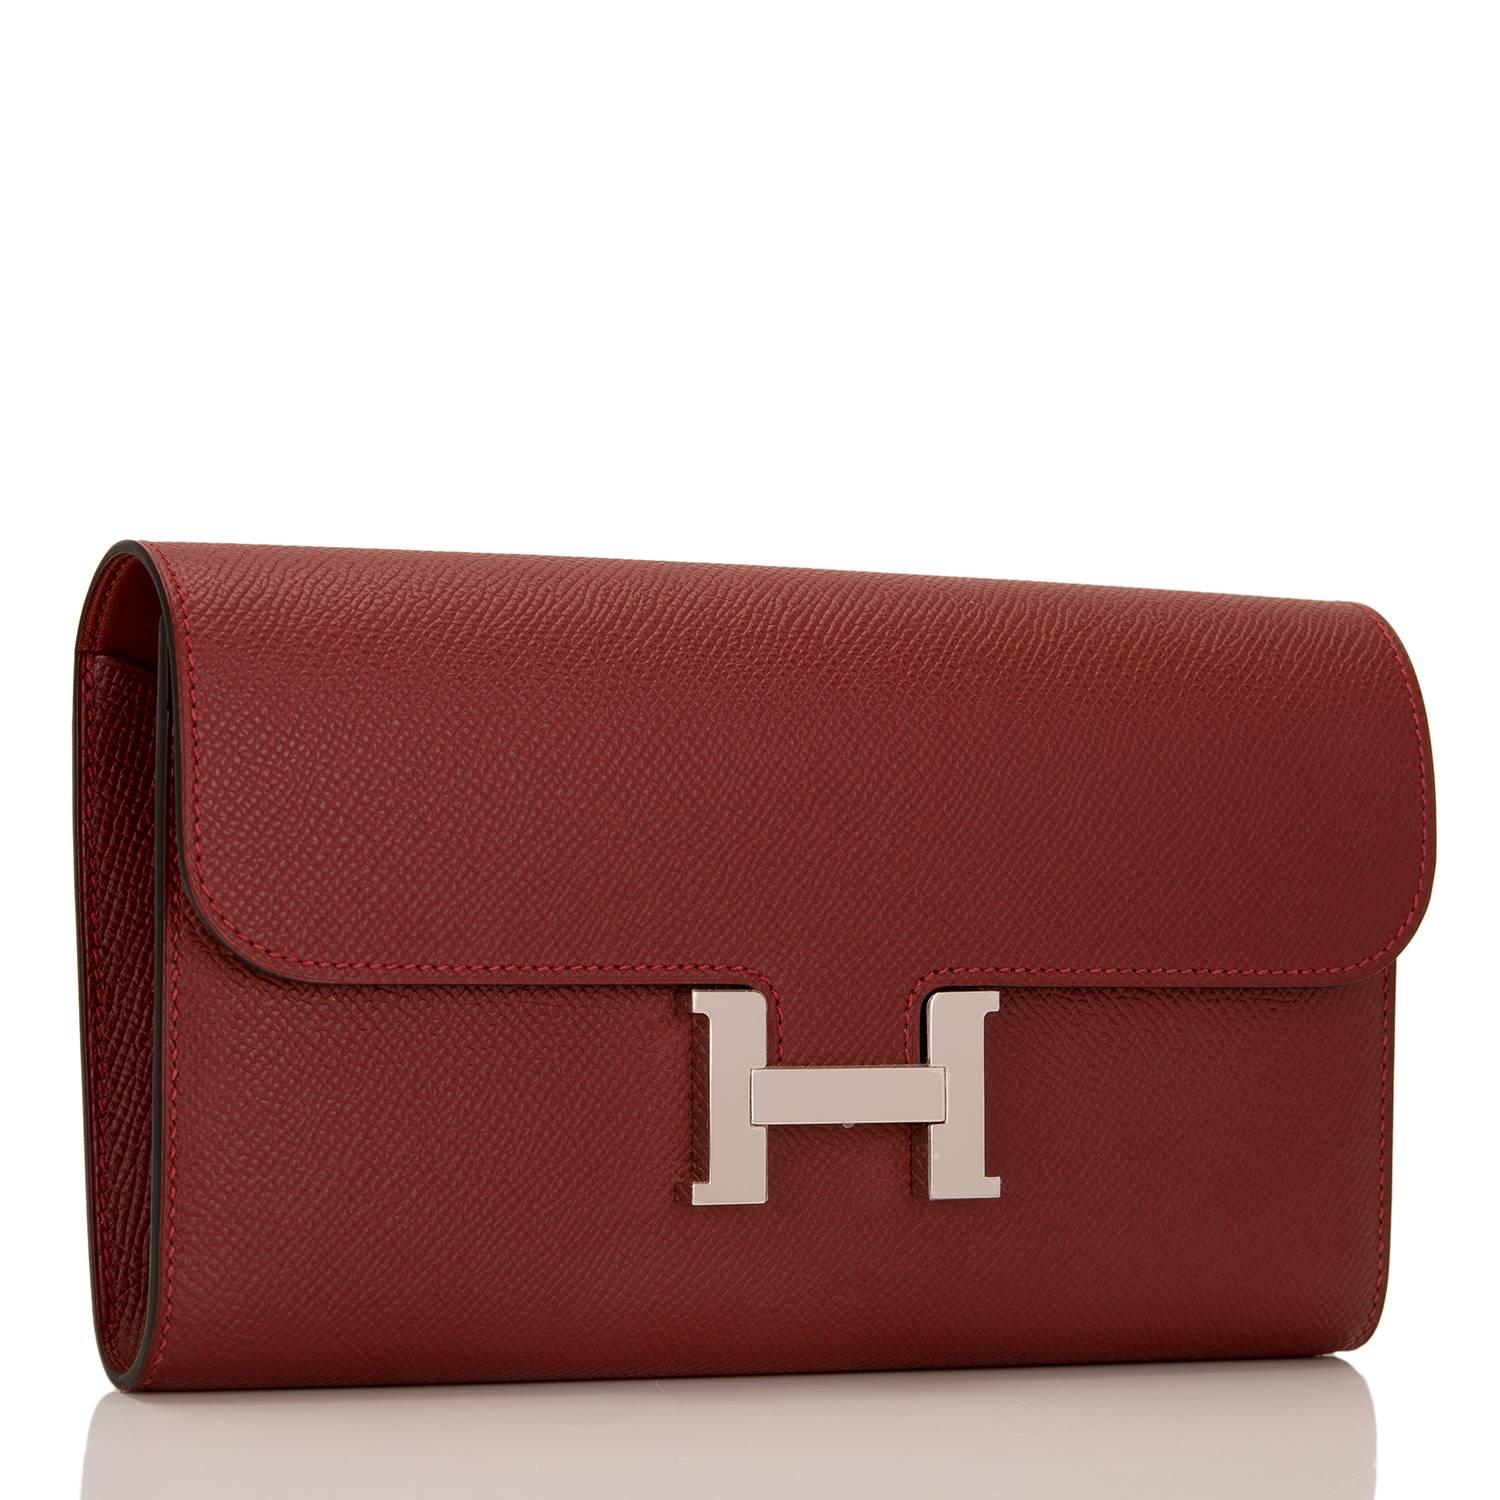 Hermes Rouge H Constance Long Wallet of epsom leather with palladium hardware.

This Wallet features tonal stitching, a metal "H" snap lock closure and a rear exterior pocket.

The interior is lined with Rouge H epsom leather and has